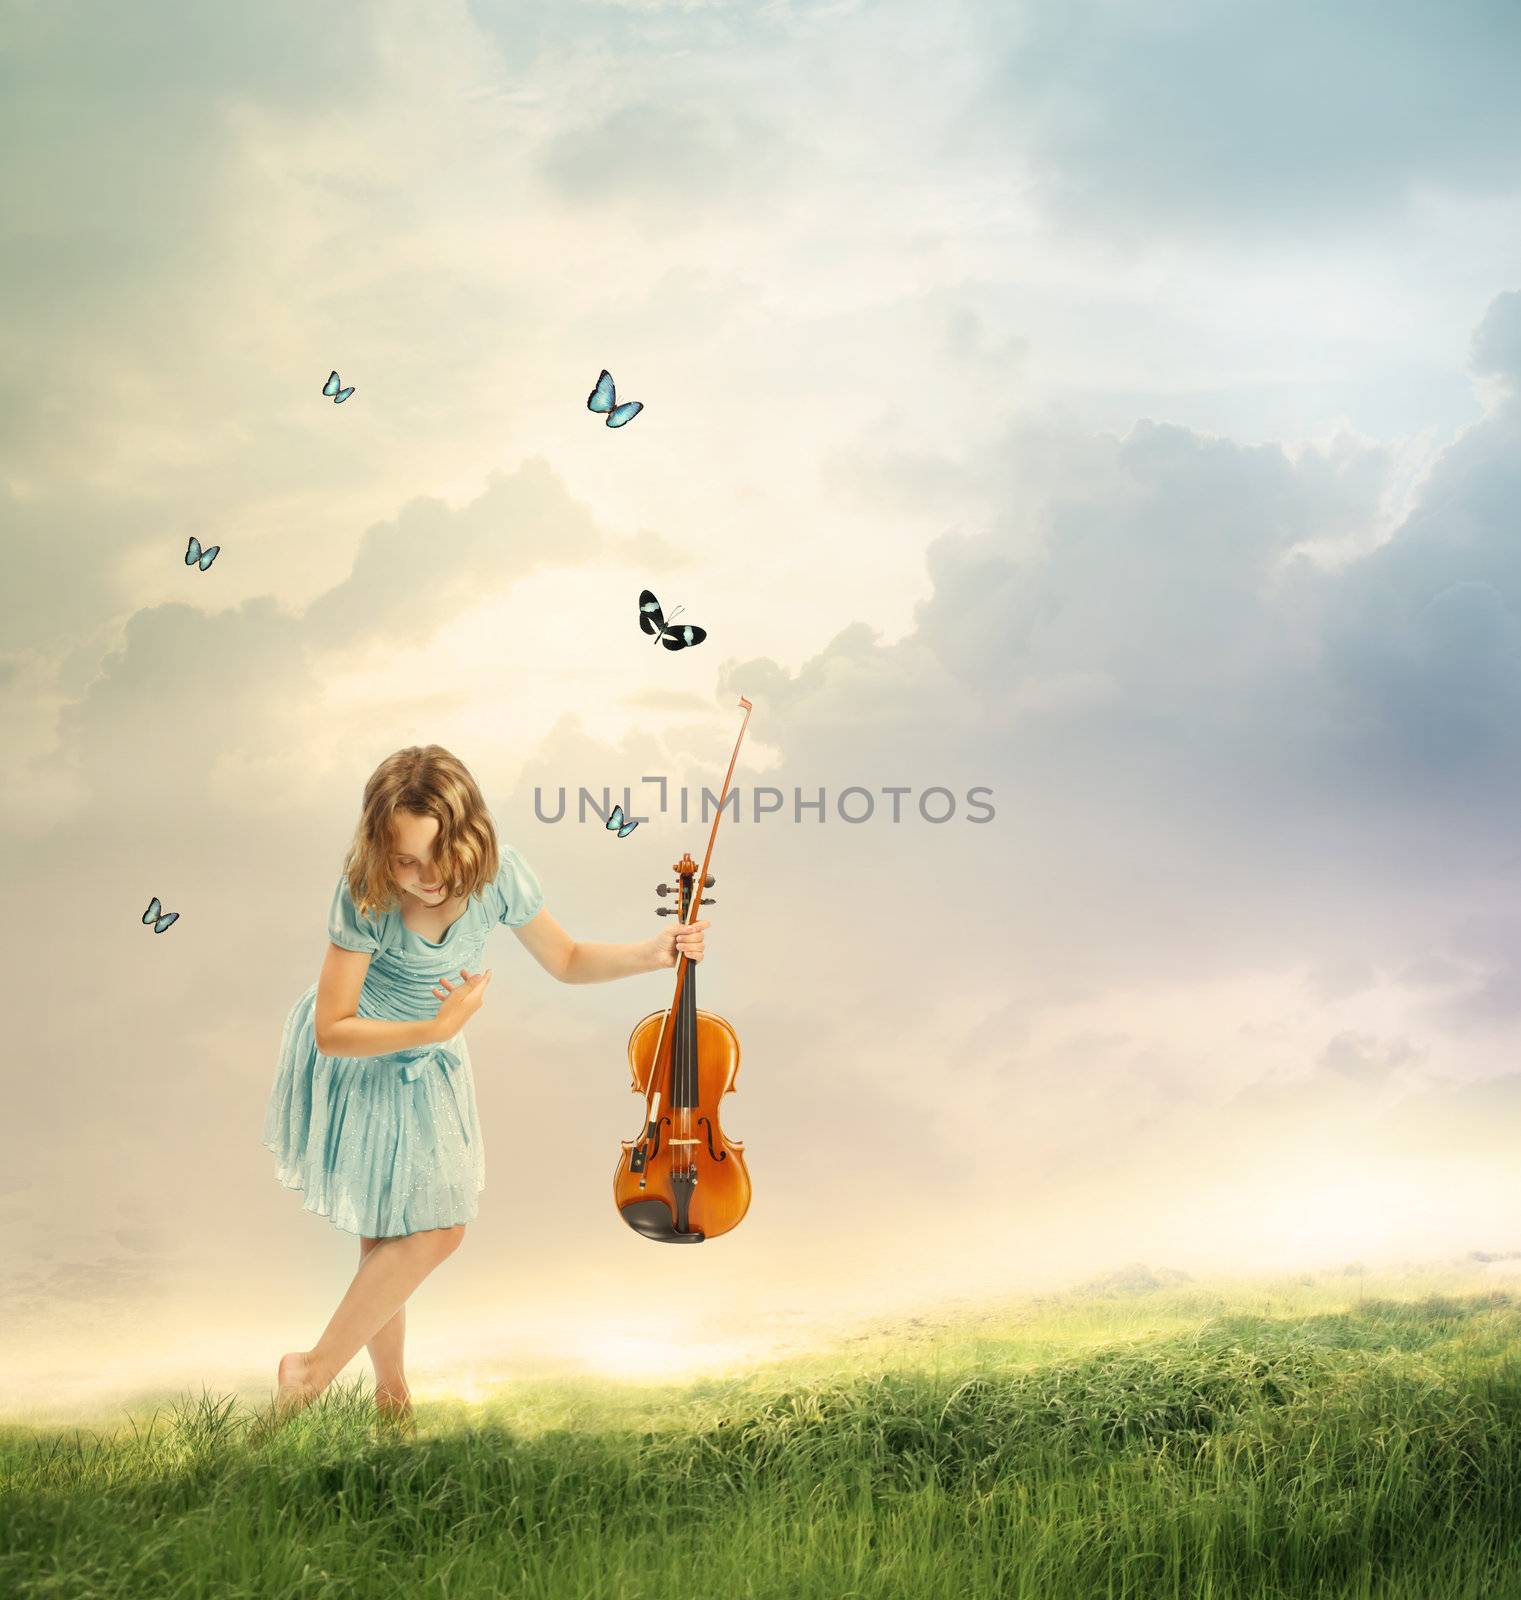 Little girl with a violin in a fantasy landscape with butterflies 